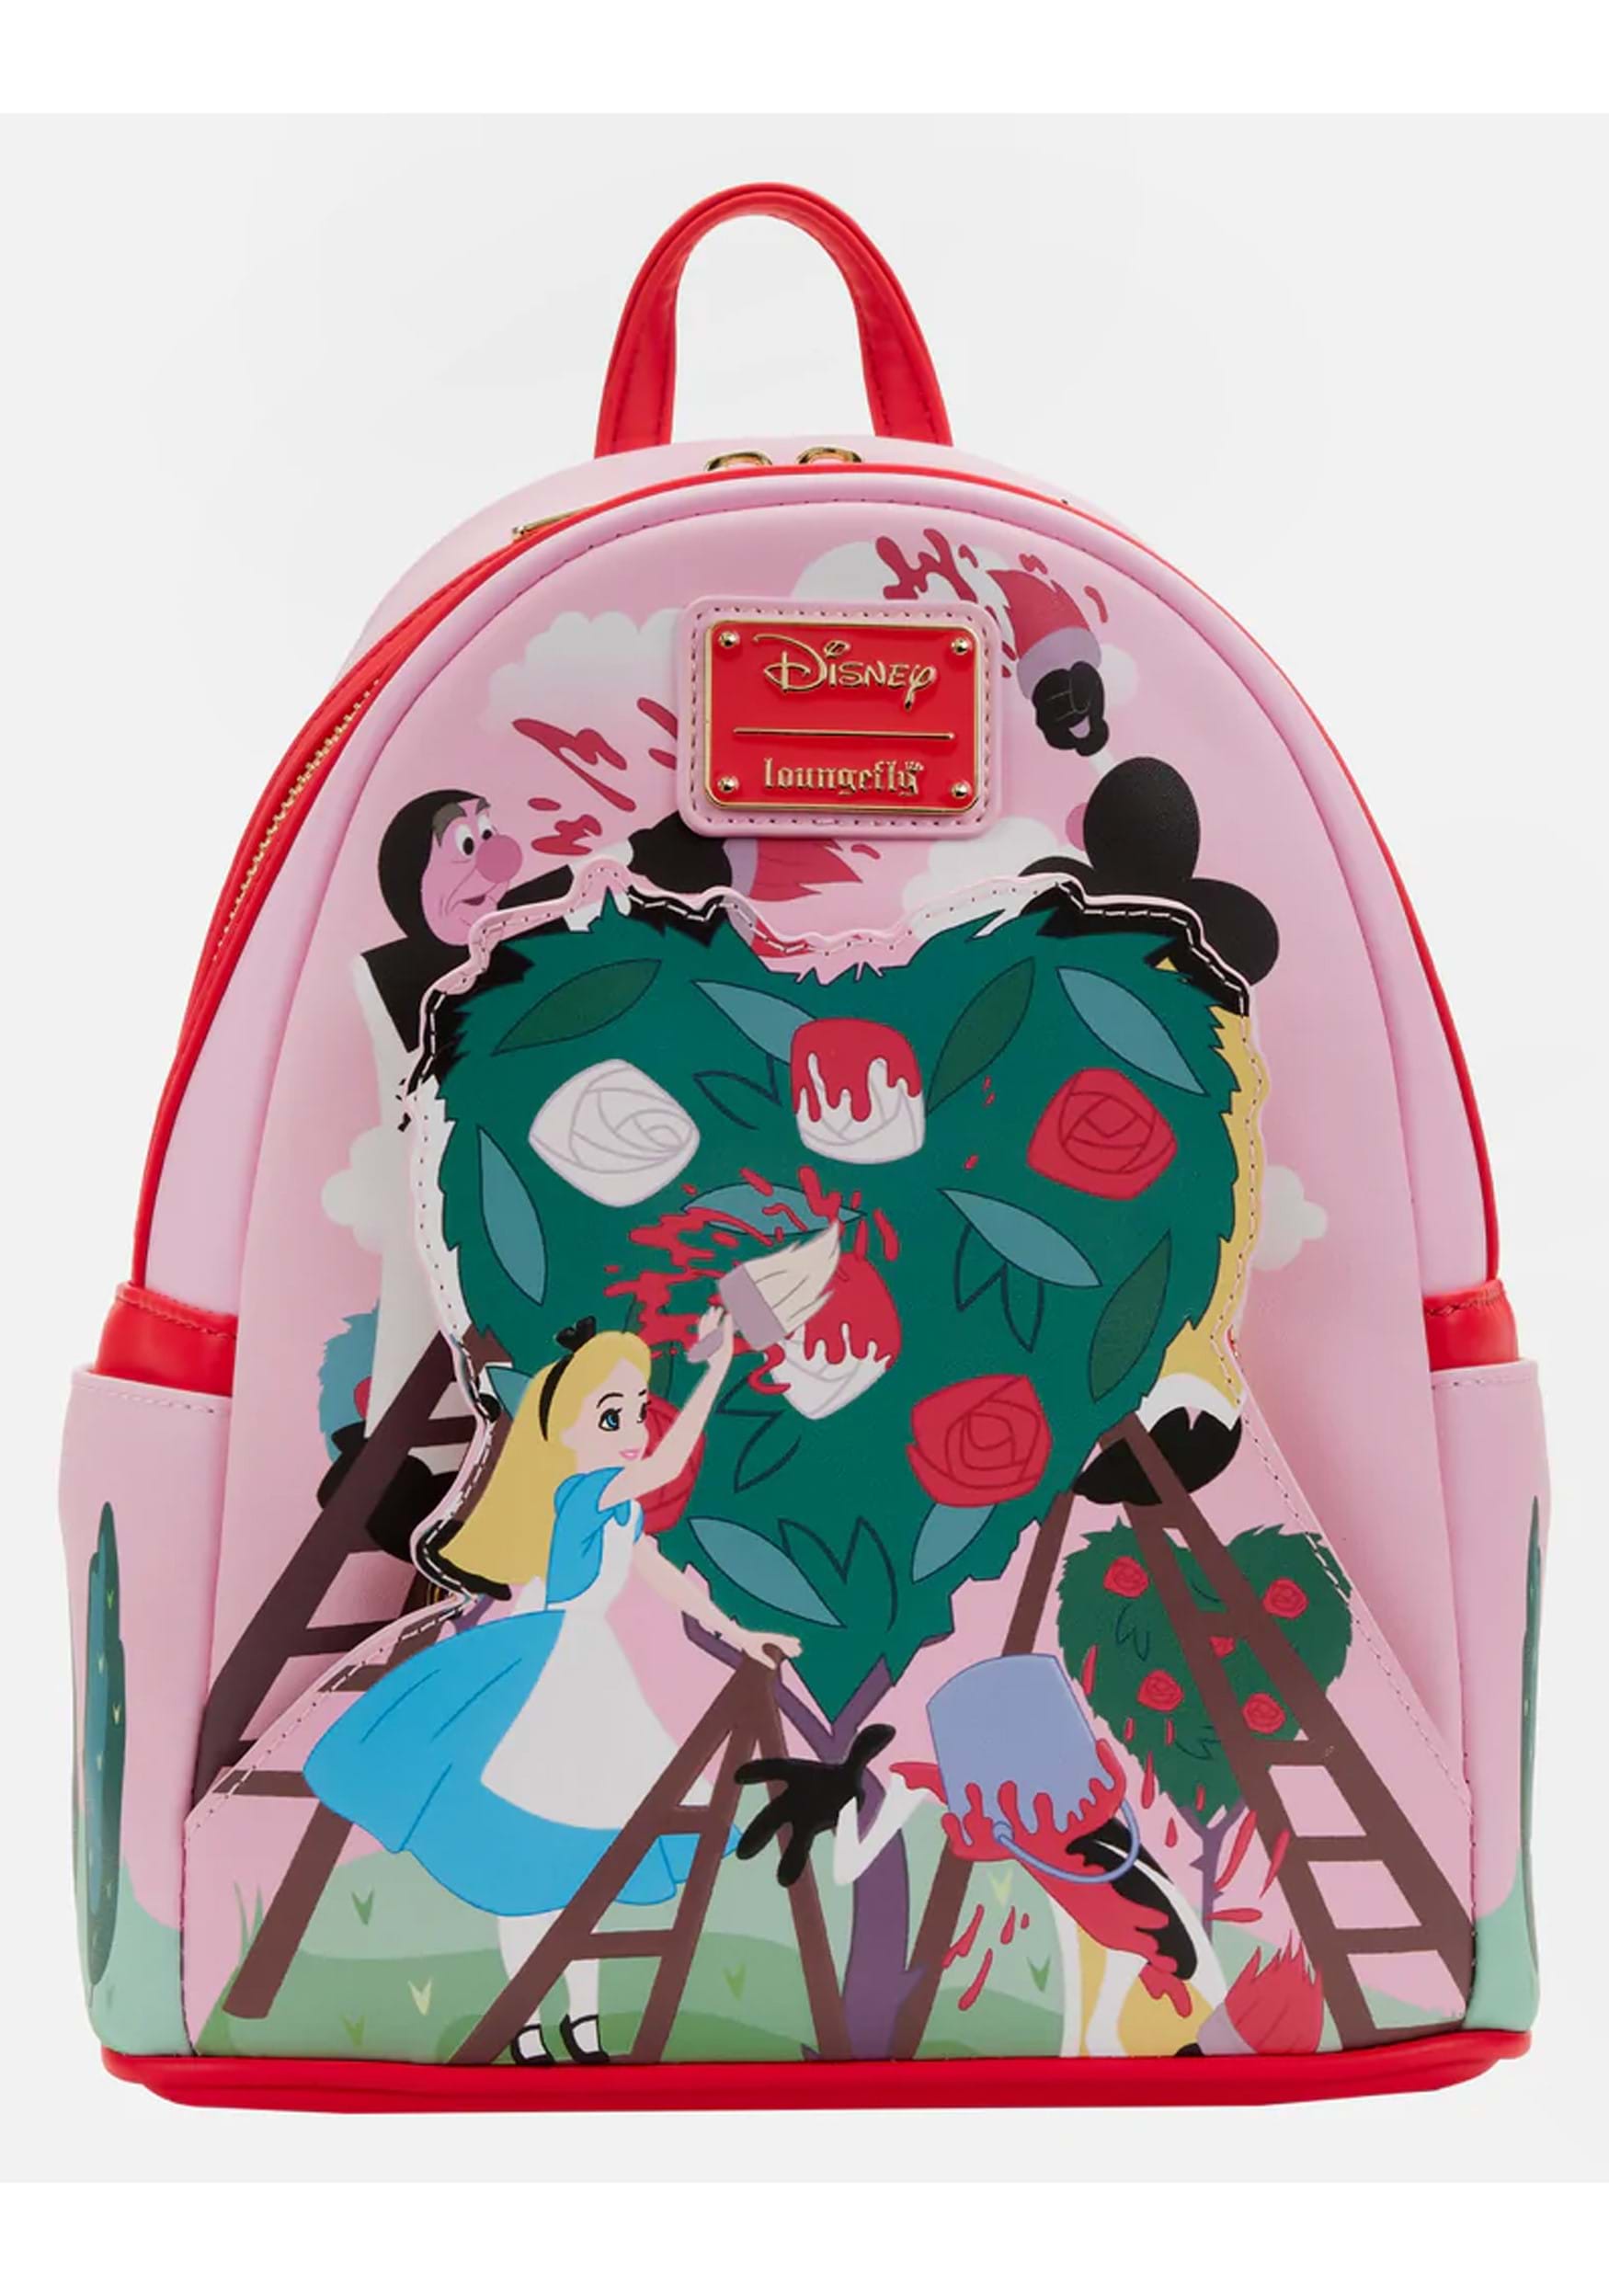 Disney Alice in Wonderland Painting the Roses Loungefly Mini Backpack